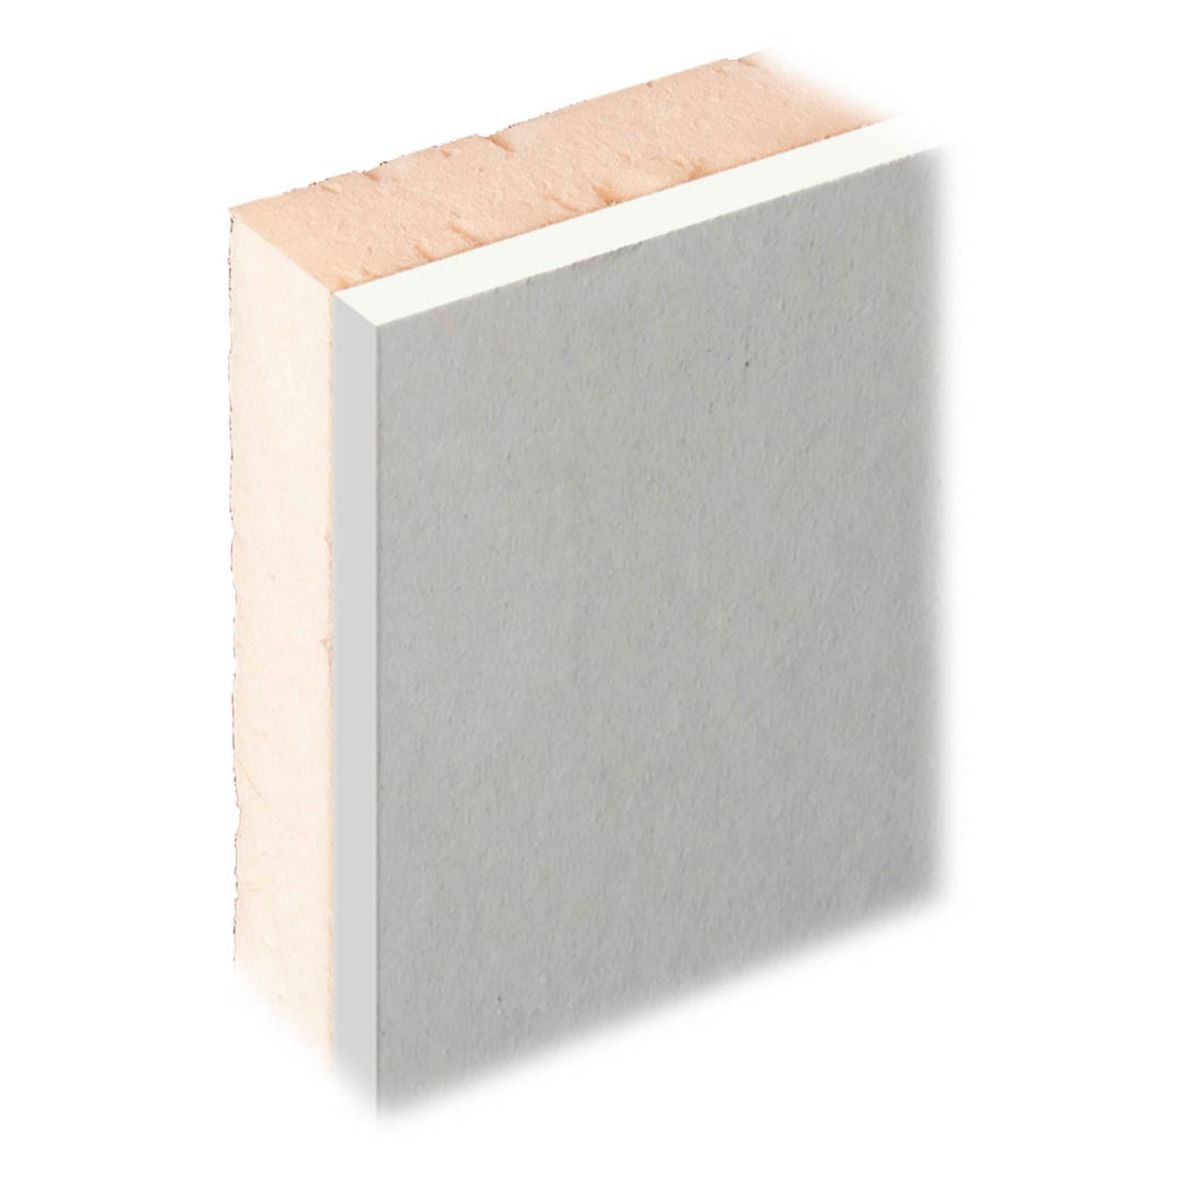 Image of Knauf XPS Laminate Plus Insulated Plasterboard Tapered Edge - 55mm x 1.2m x 2.4m